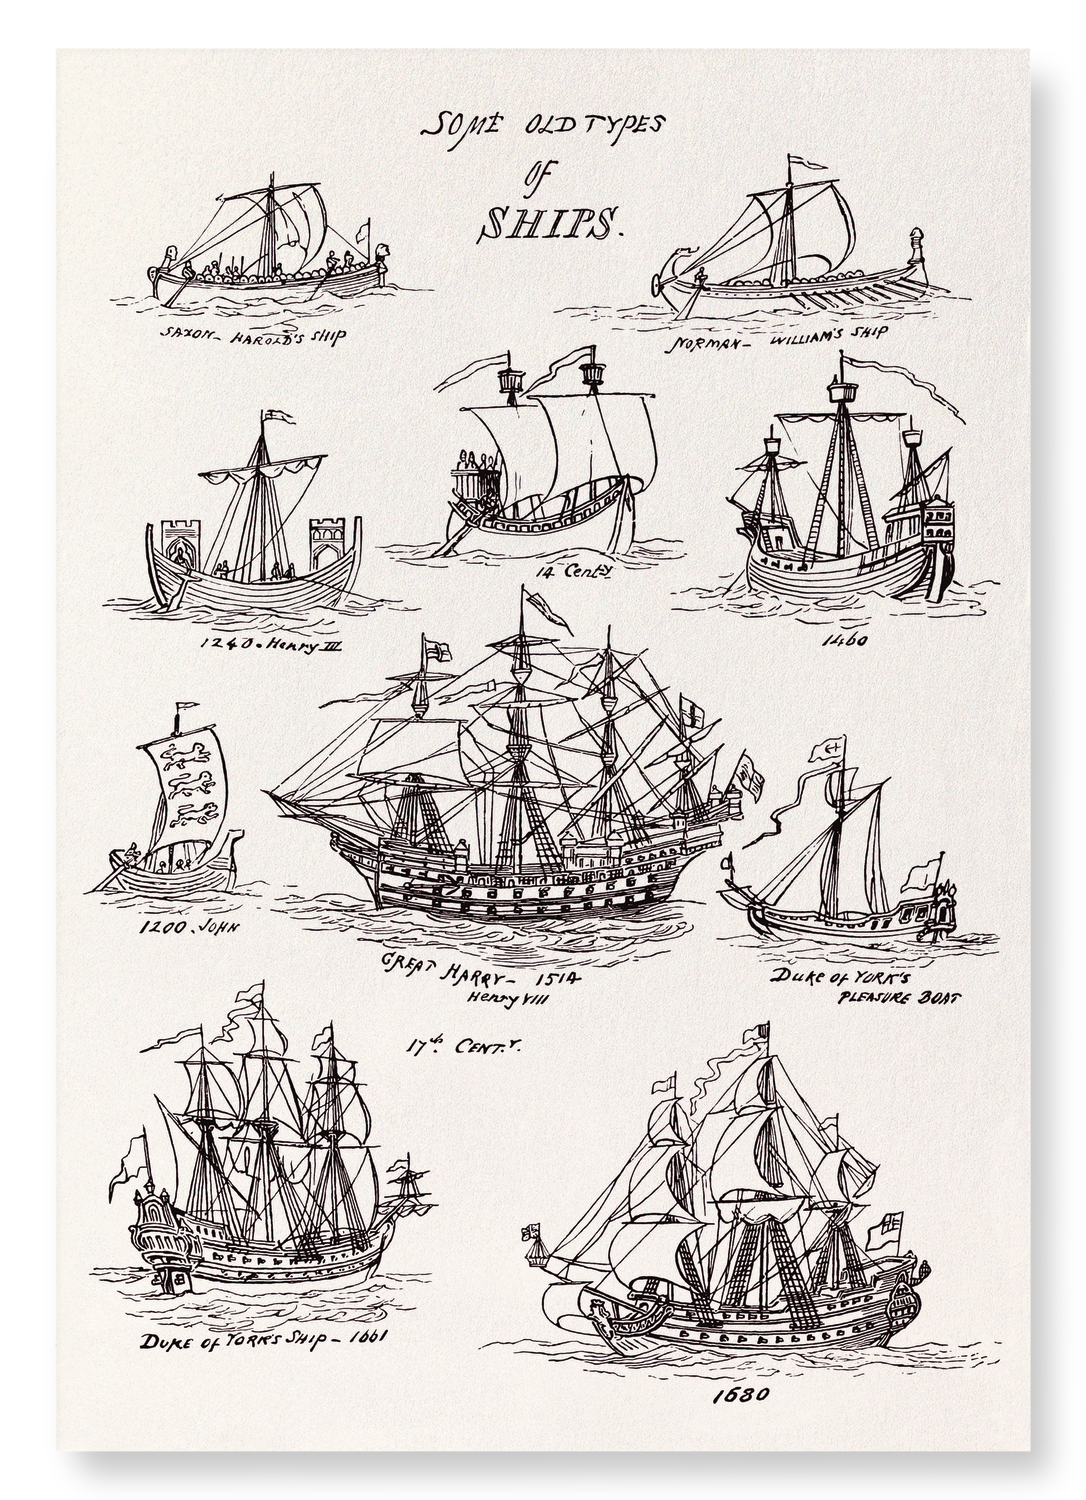 SEA PICTURES DRAWN WITH PEN AND PENCIL (1882)